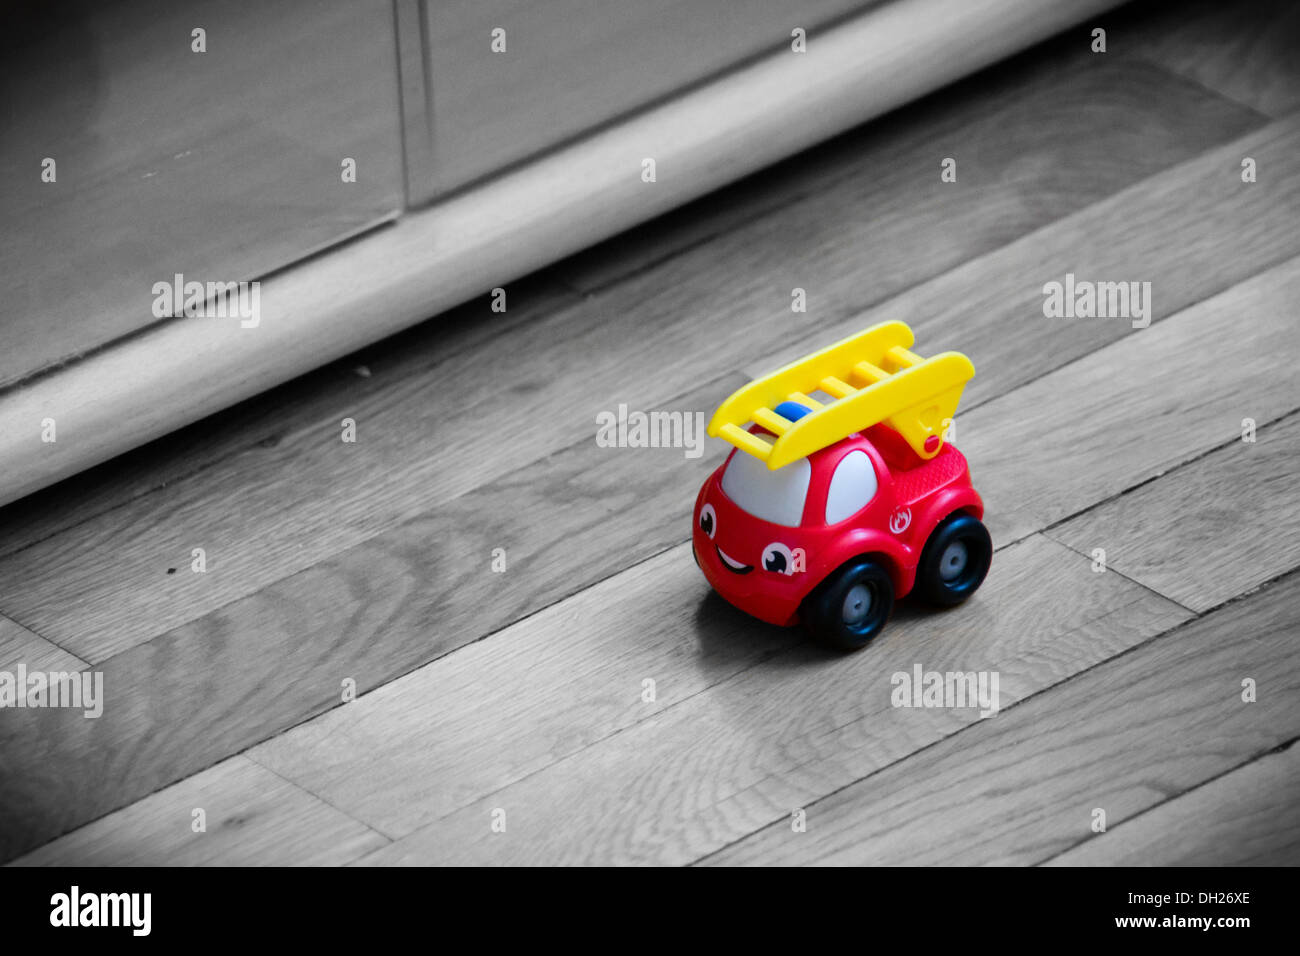 A fire truck toy, on a black and white background Stock Photo